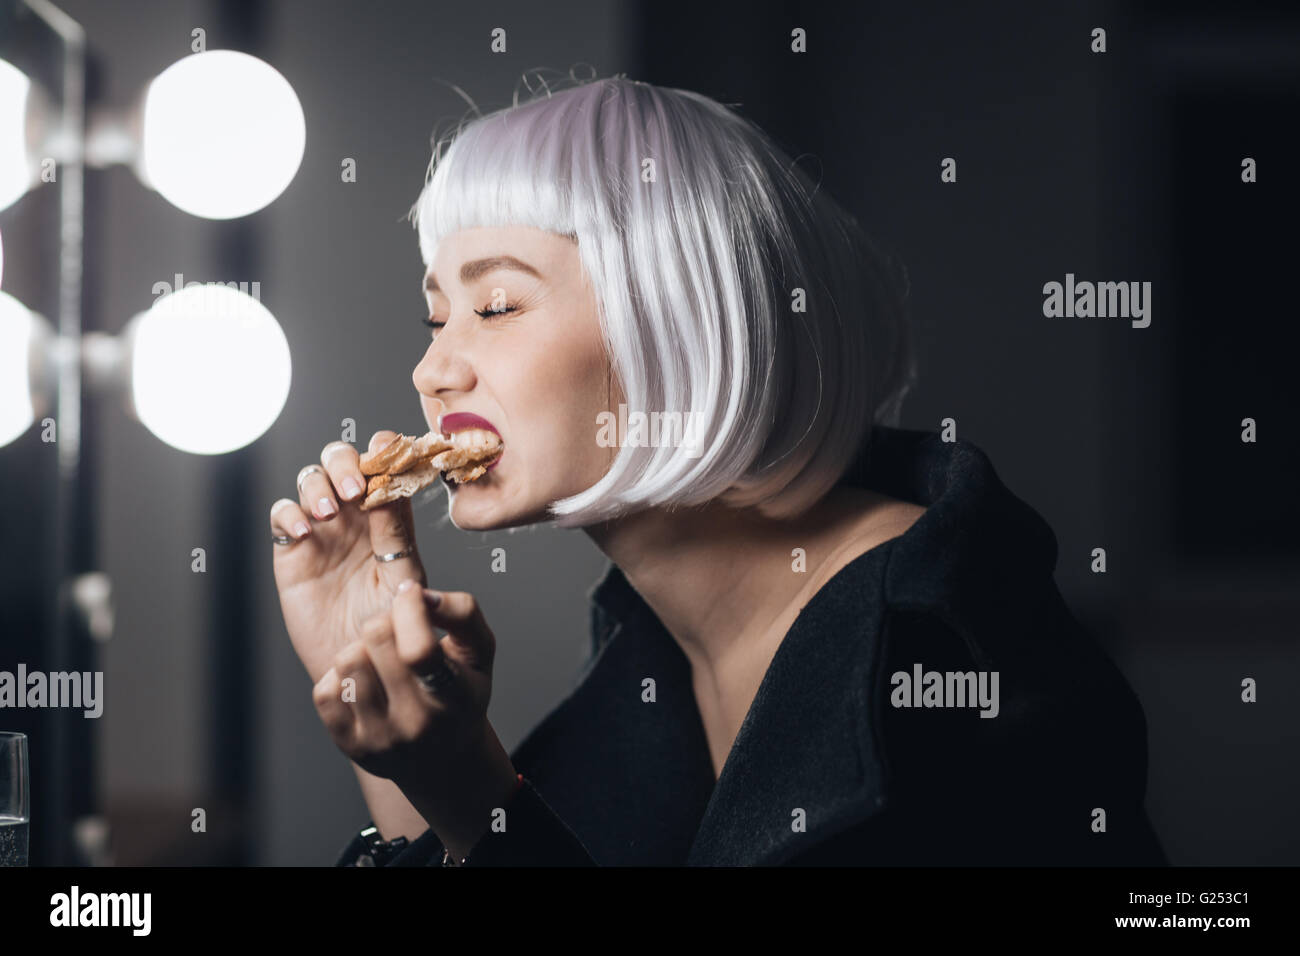 Funny cute young woman in blonde wig eating pizza in dressing room Stock Photo